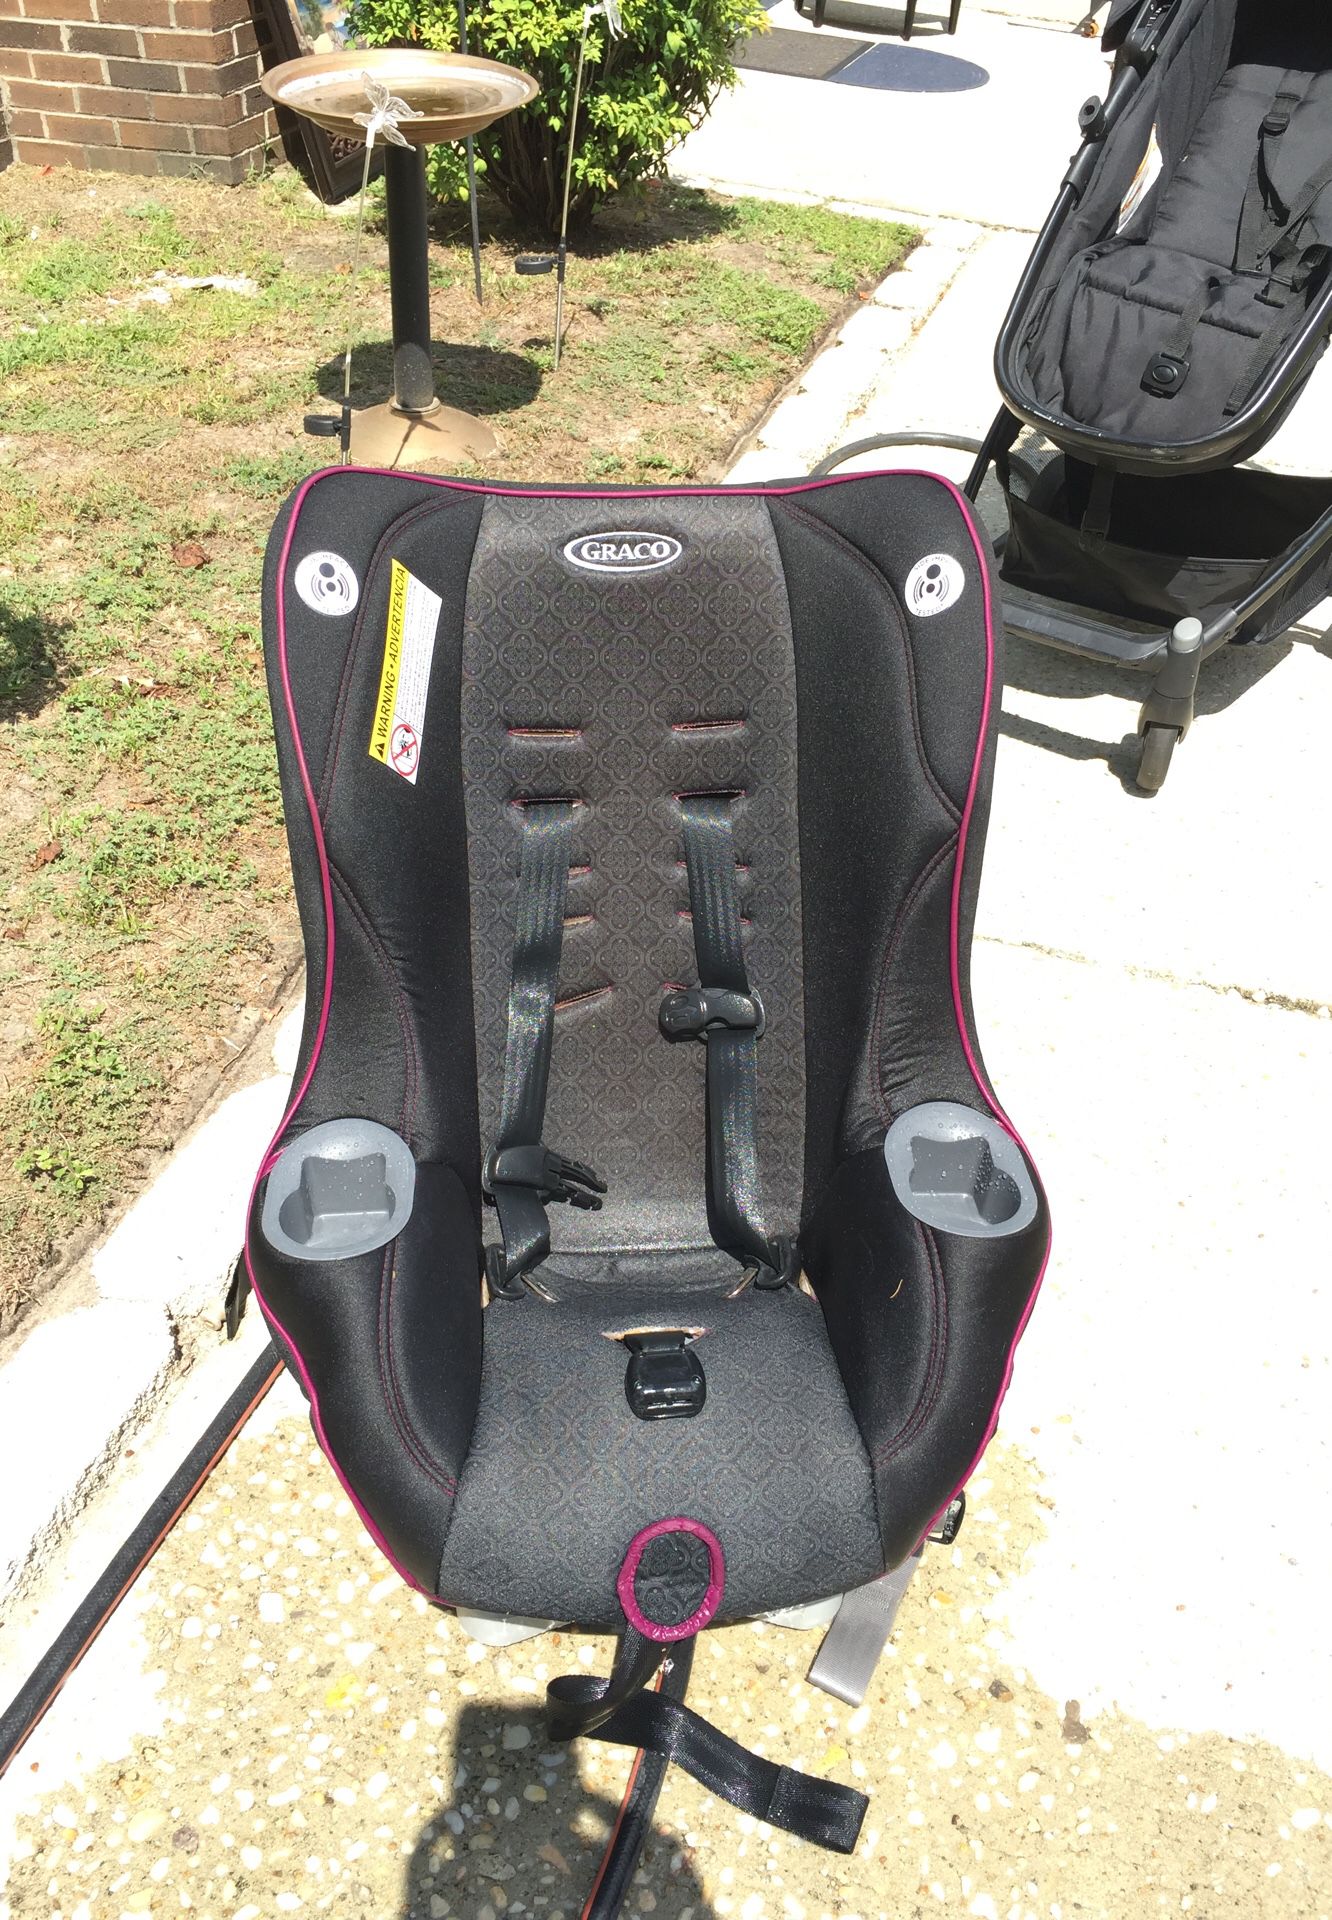 Nice Graco car seat expires 2020 or later lbs 4 to 70 lbs been washed heavy duty